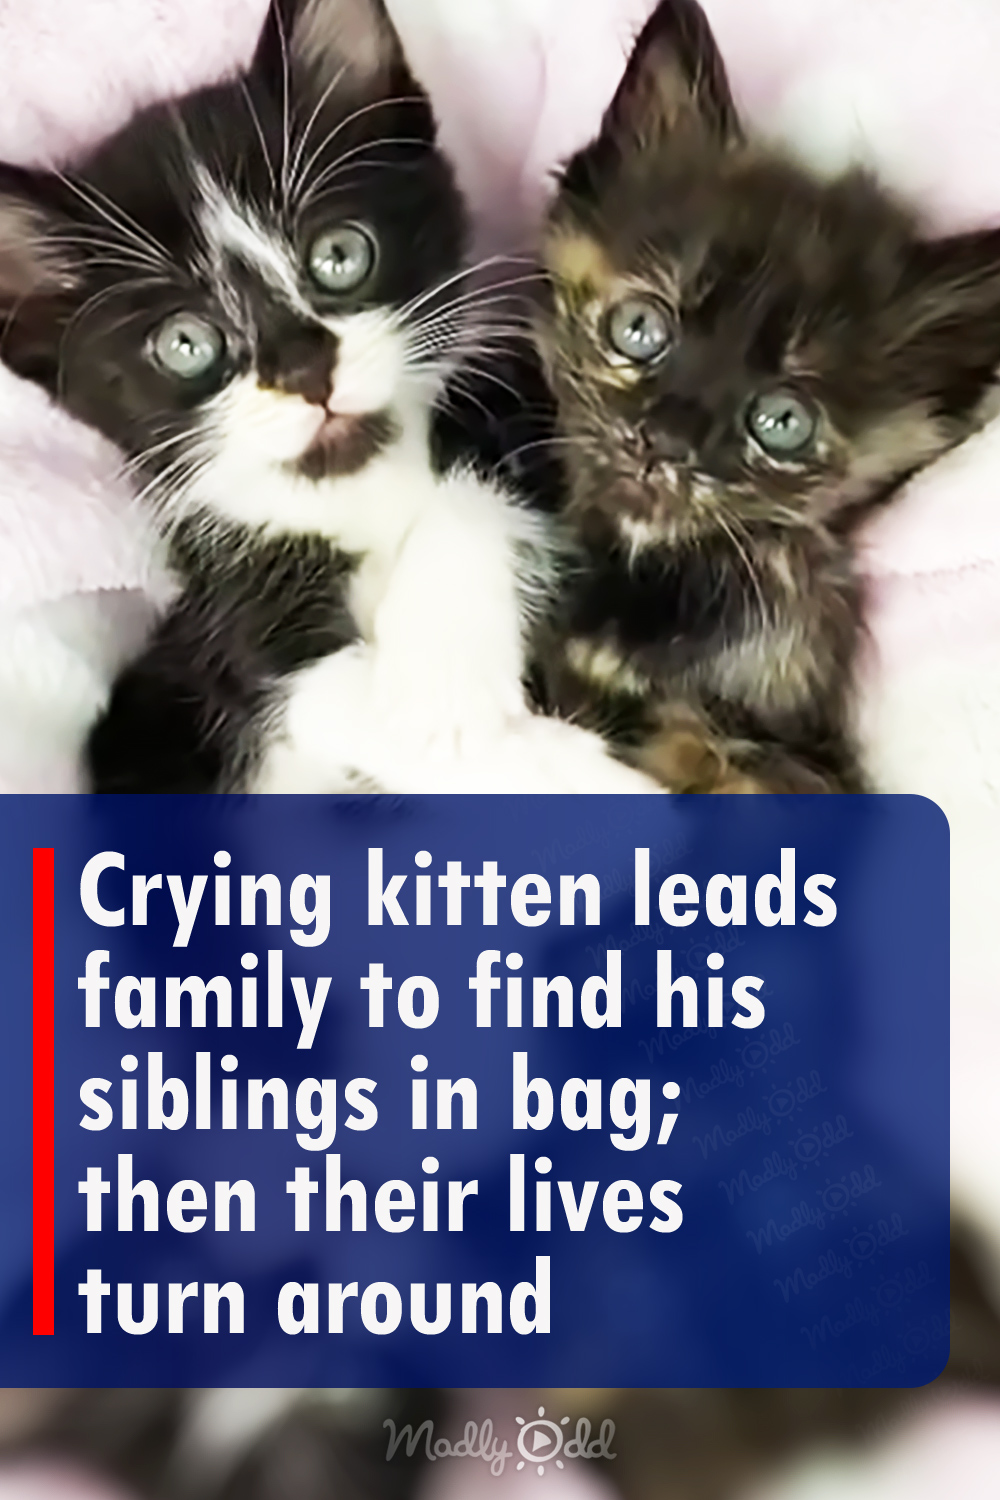 Crying kitten leads family to find his siblings in bag; then their lives turn around